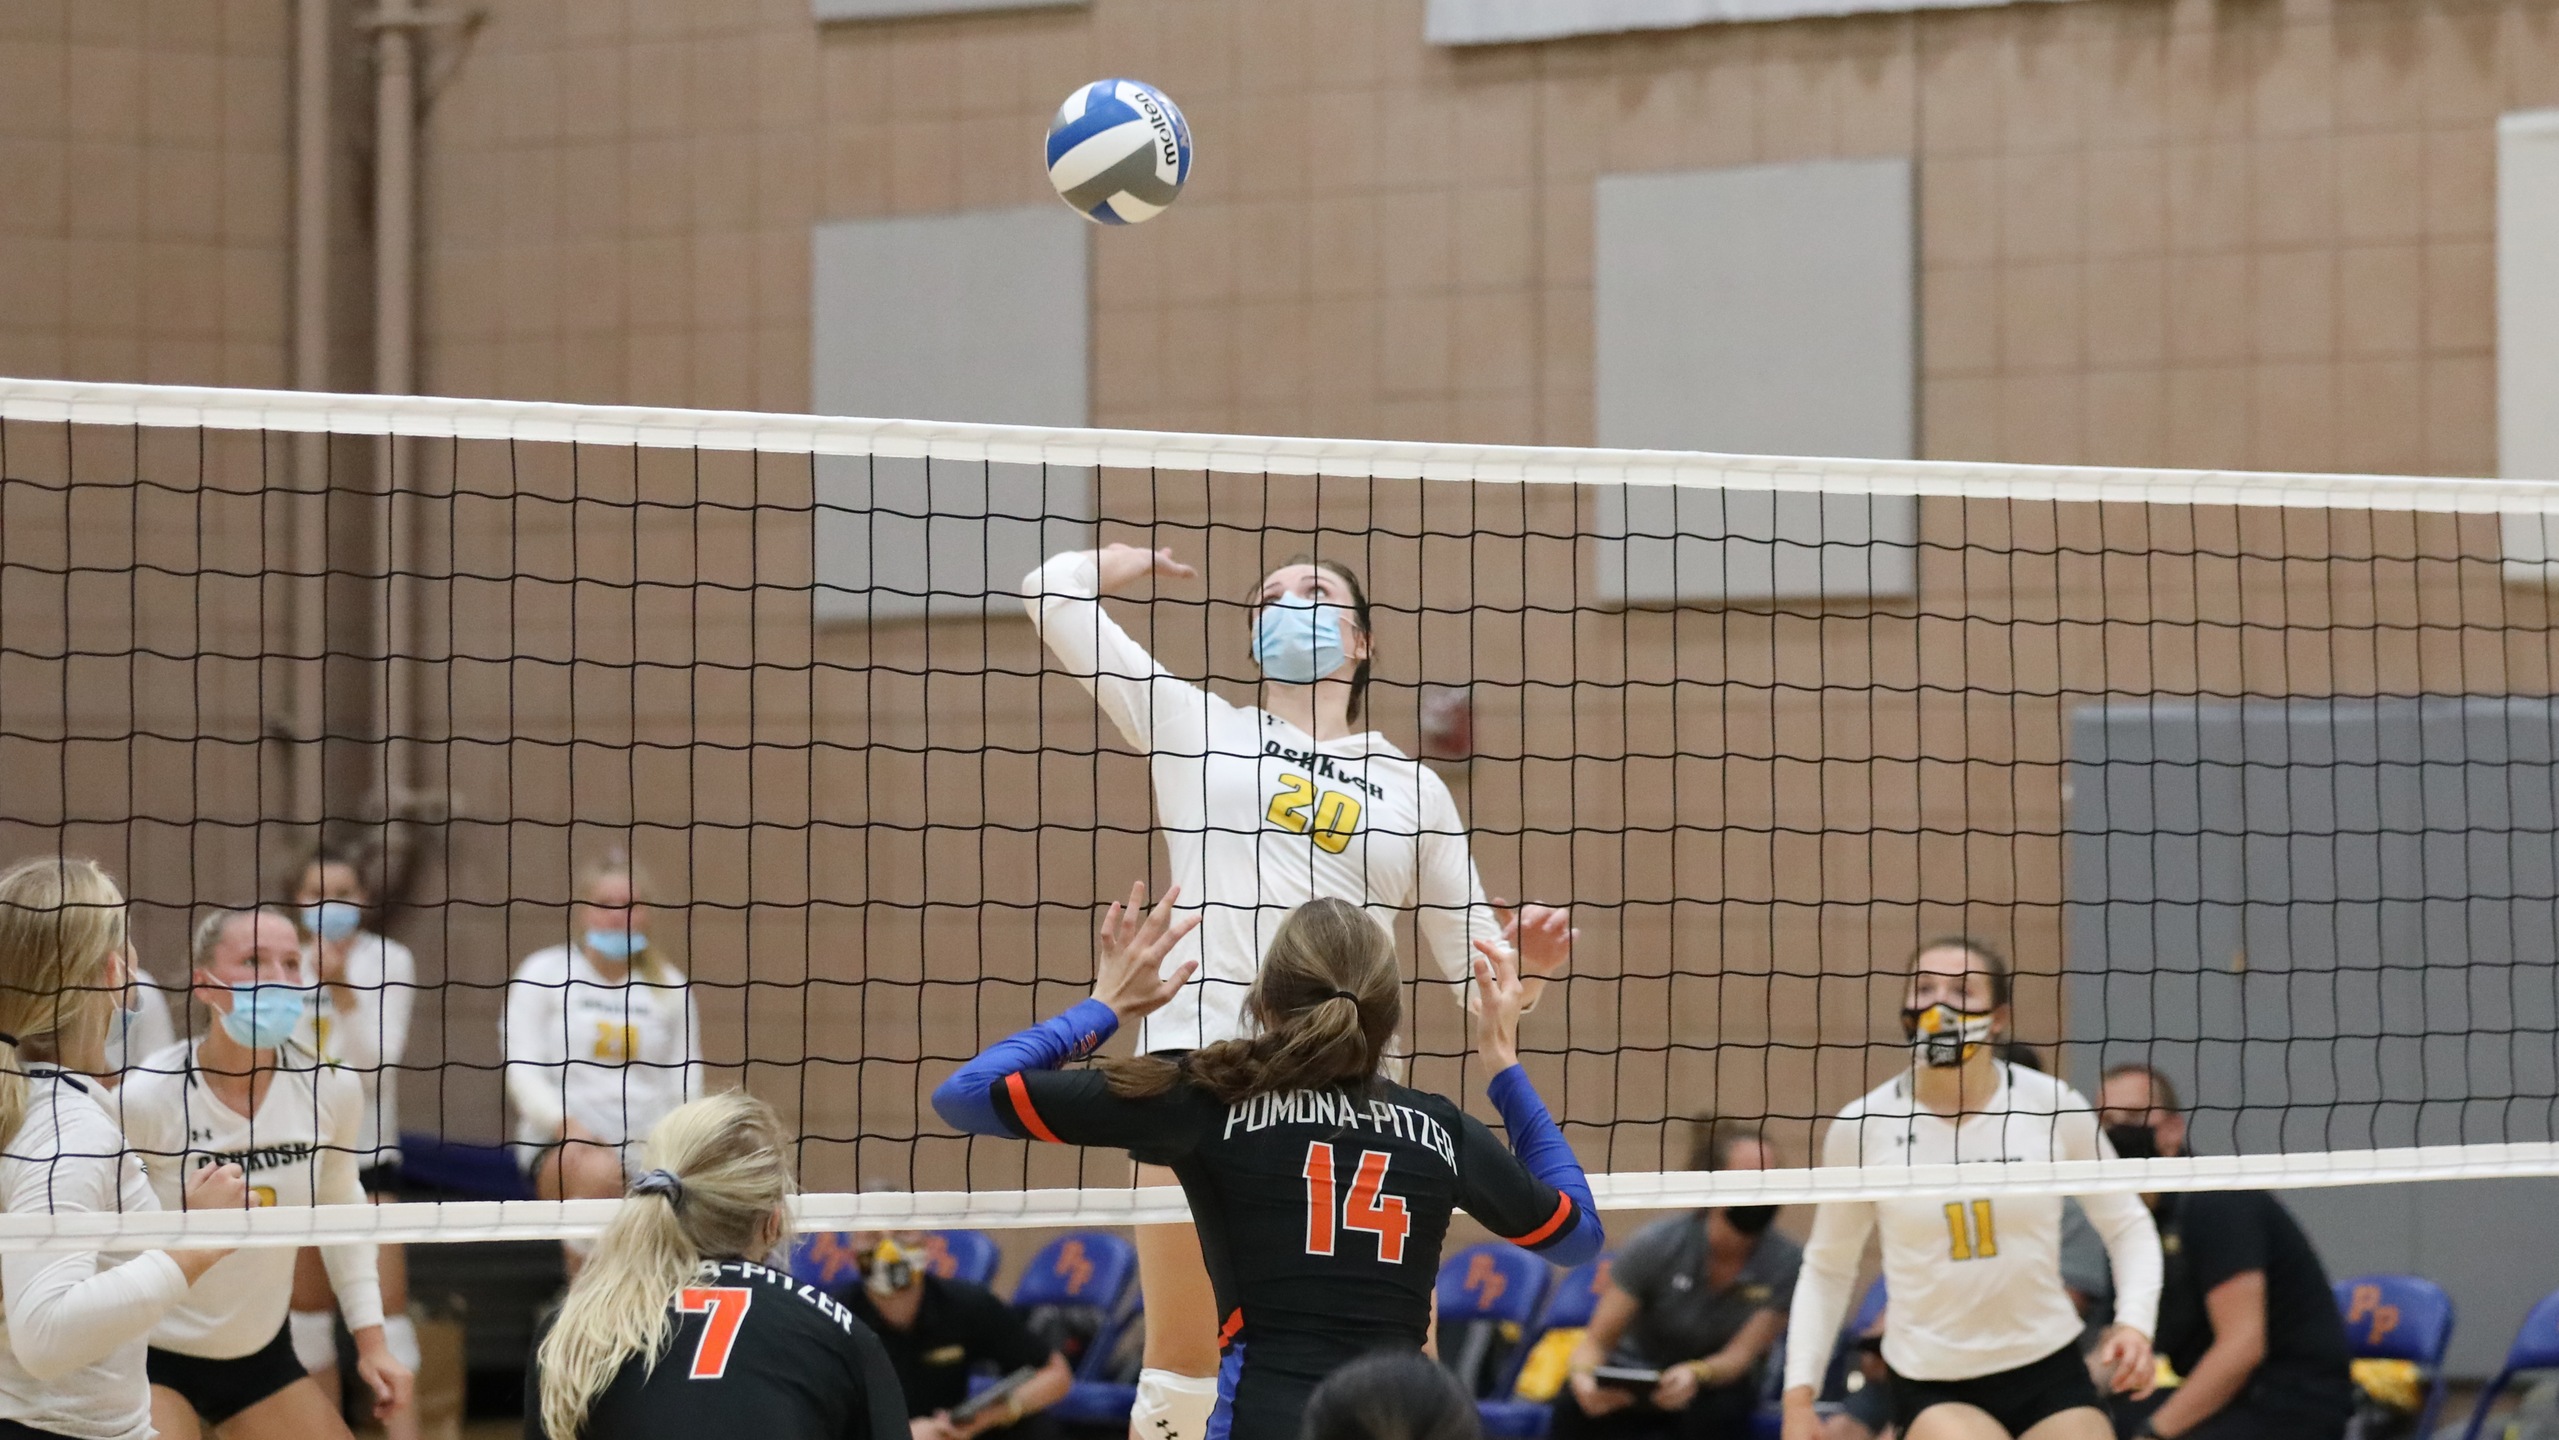 Brynna Mayer had eight kills and four digs during the Titans' three-set sweep of Pomona-Pitzer Colleges.